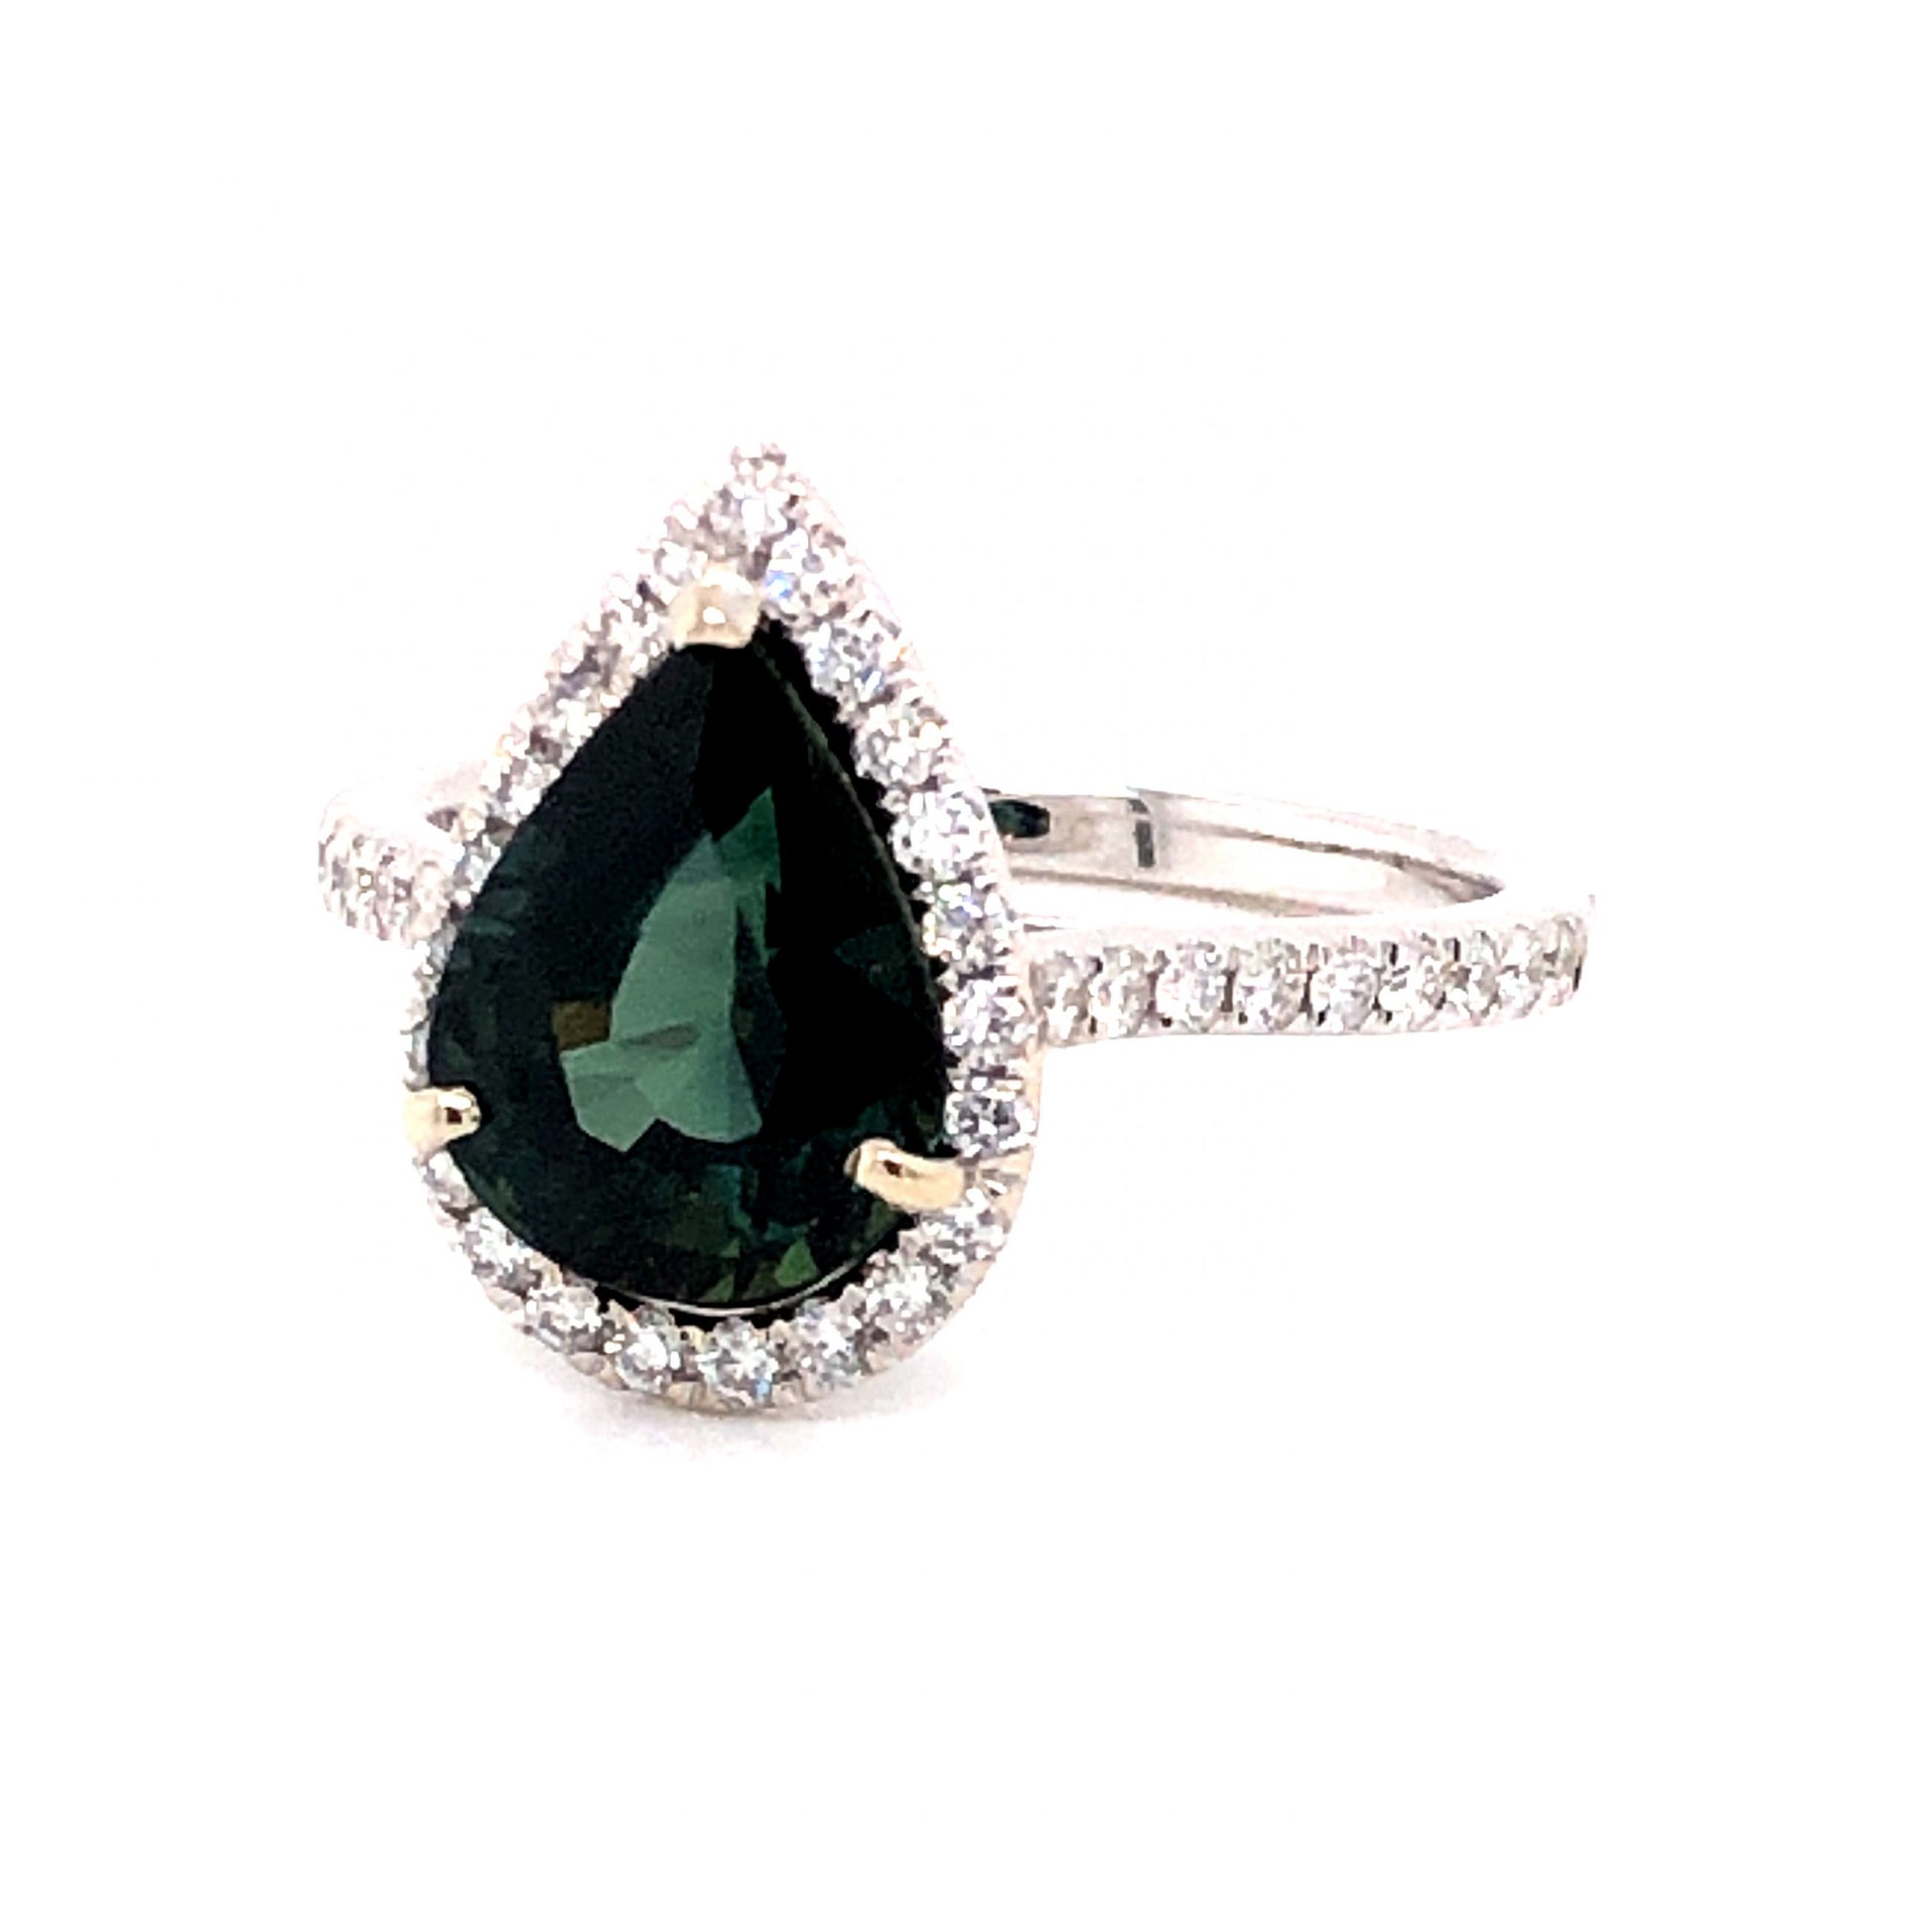 2.83 Pear Cut Green Sapphire and Diamond Ring in 14k White Gold